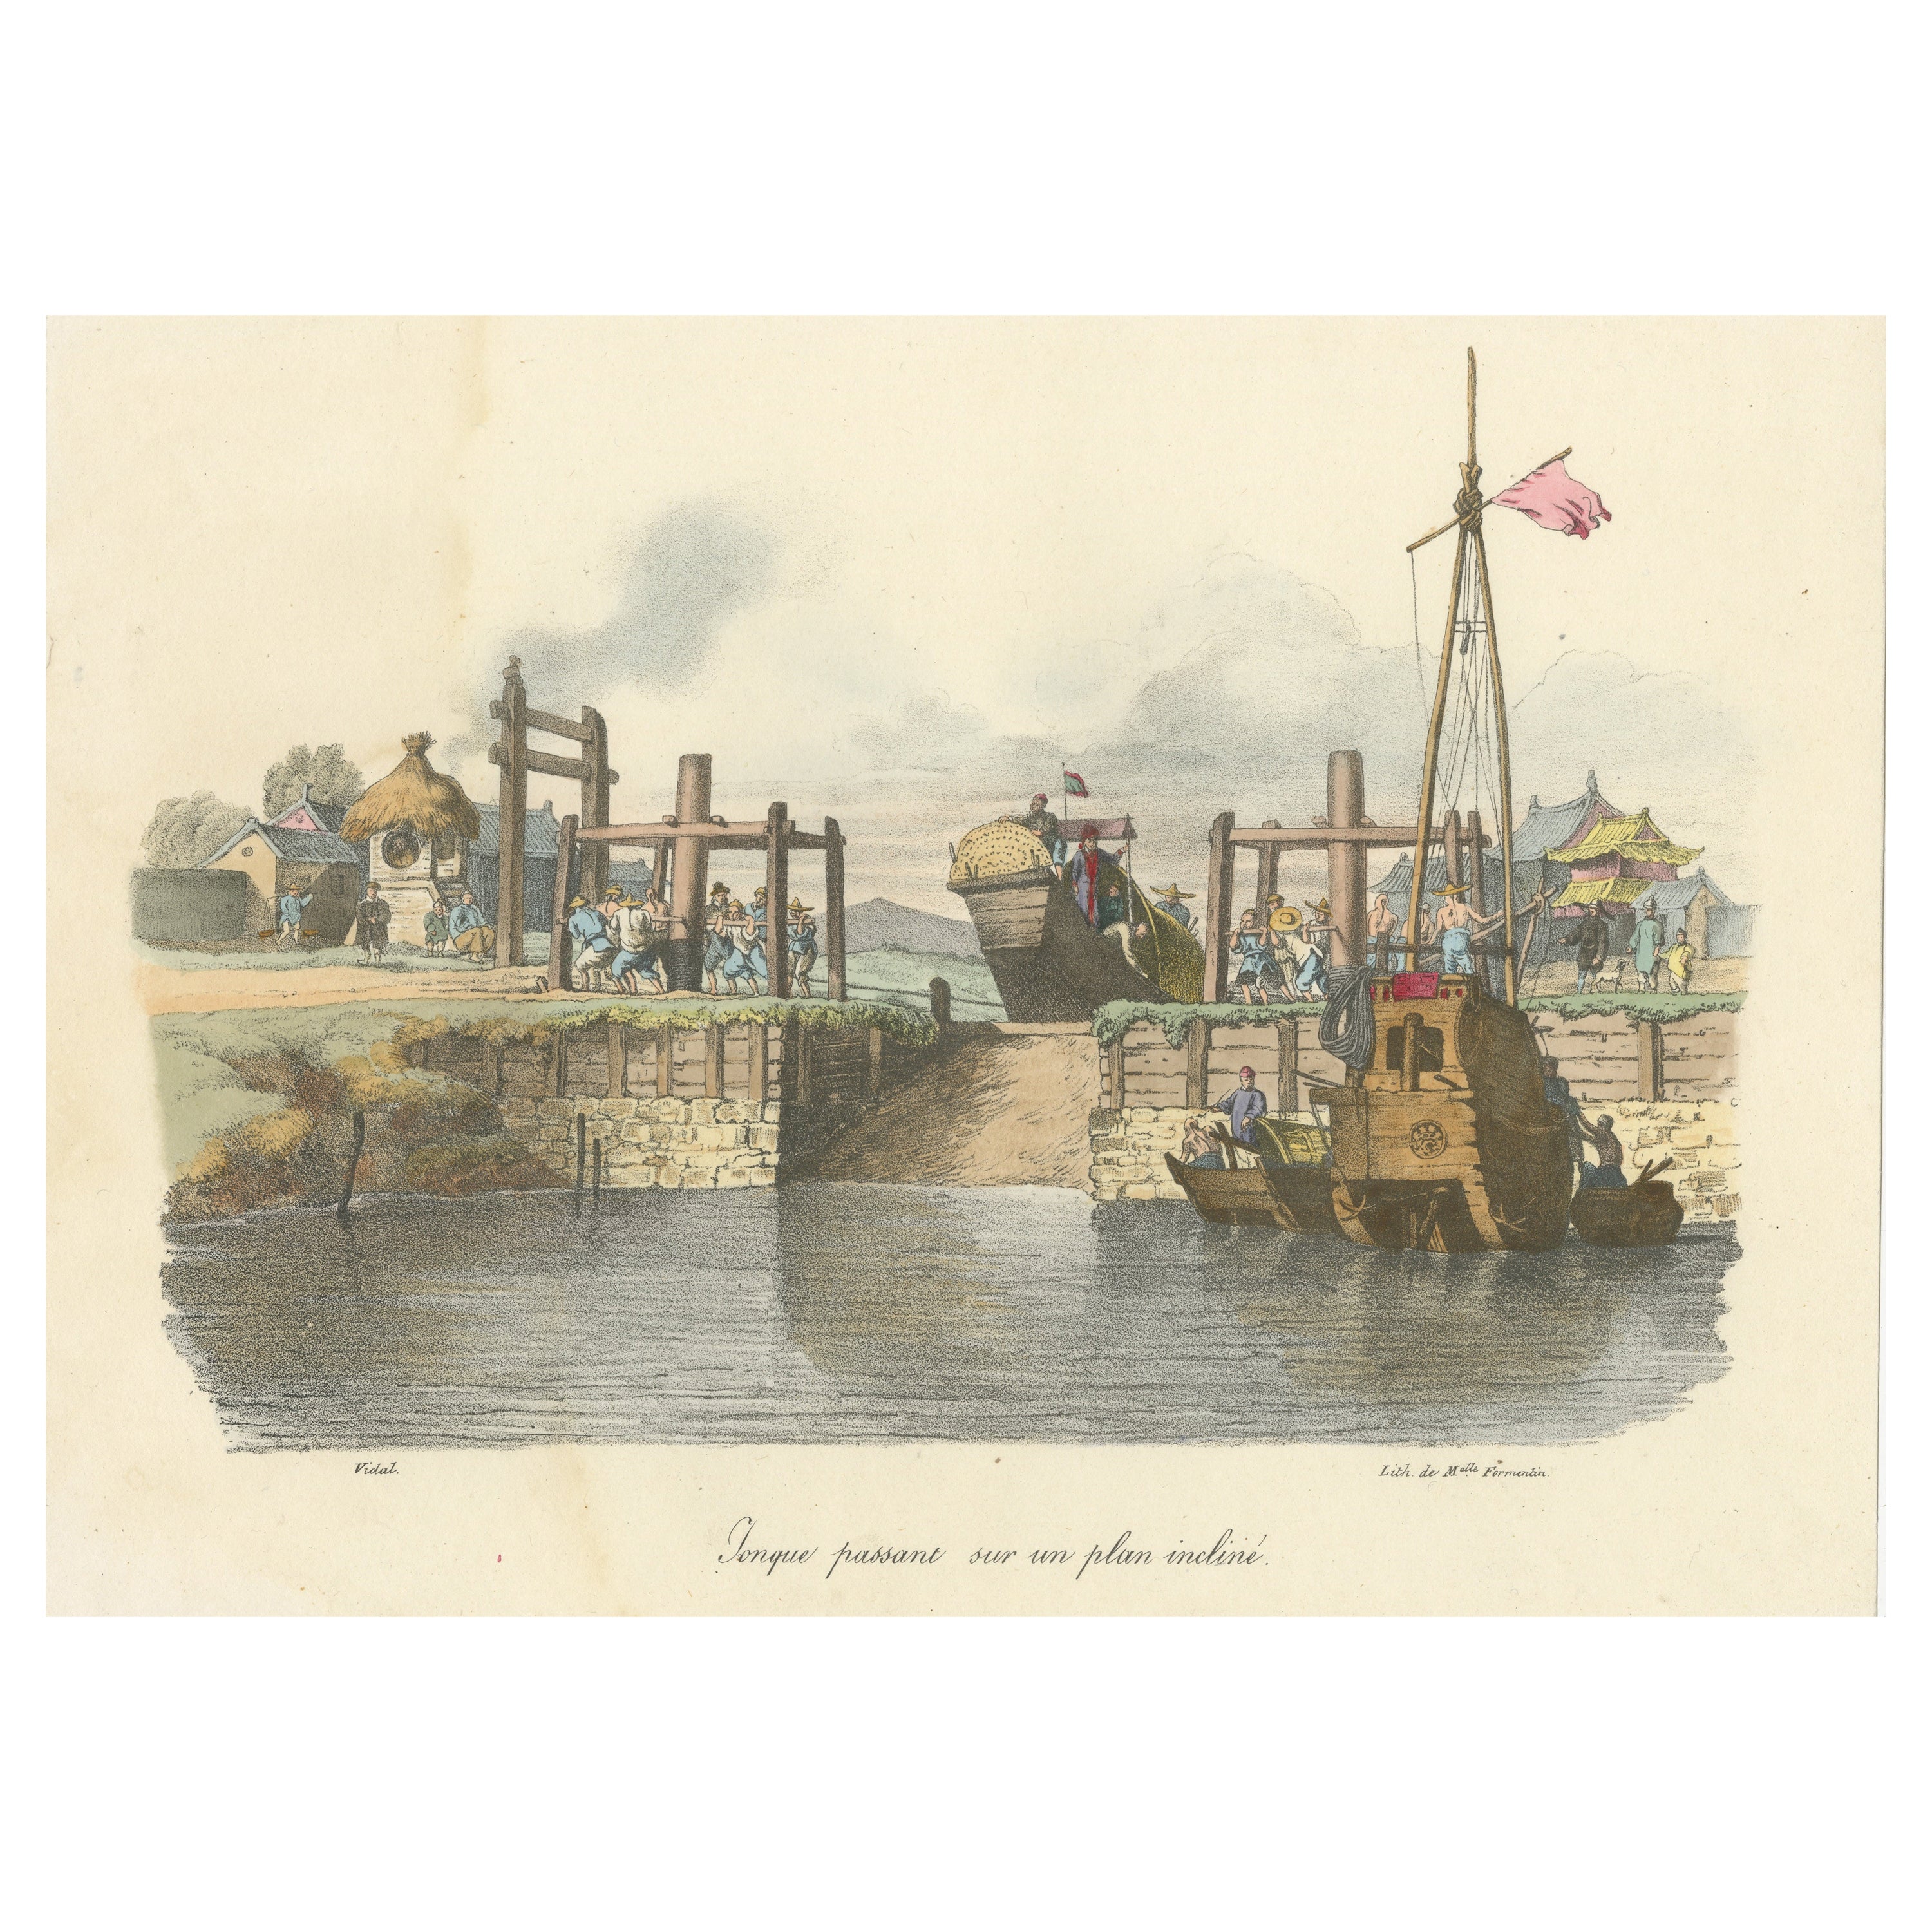 Antique Print of a Chinese Junk on a Slope For Sale